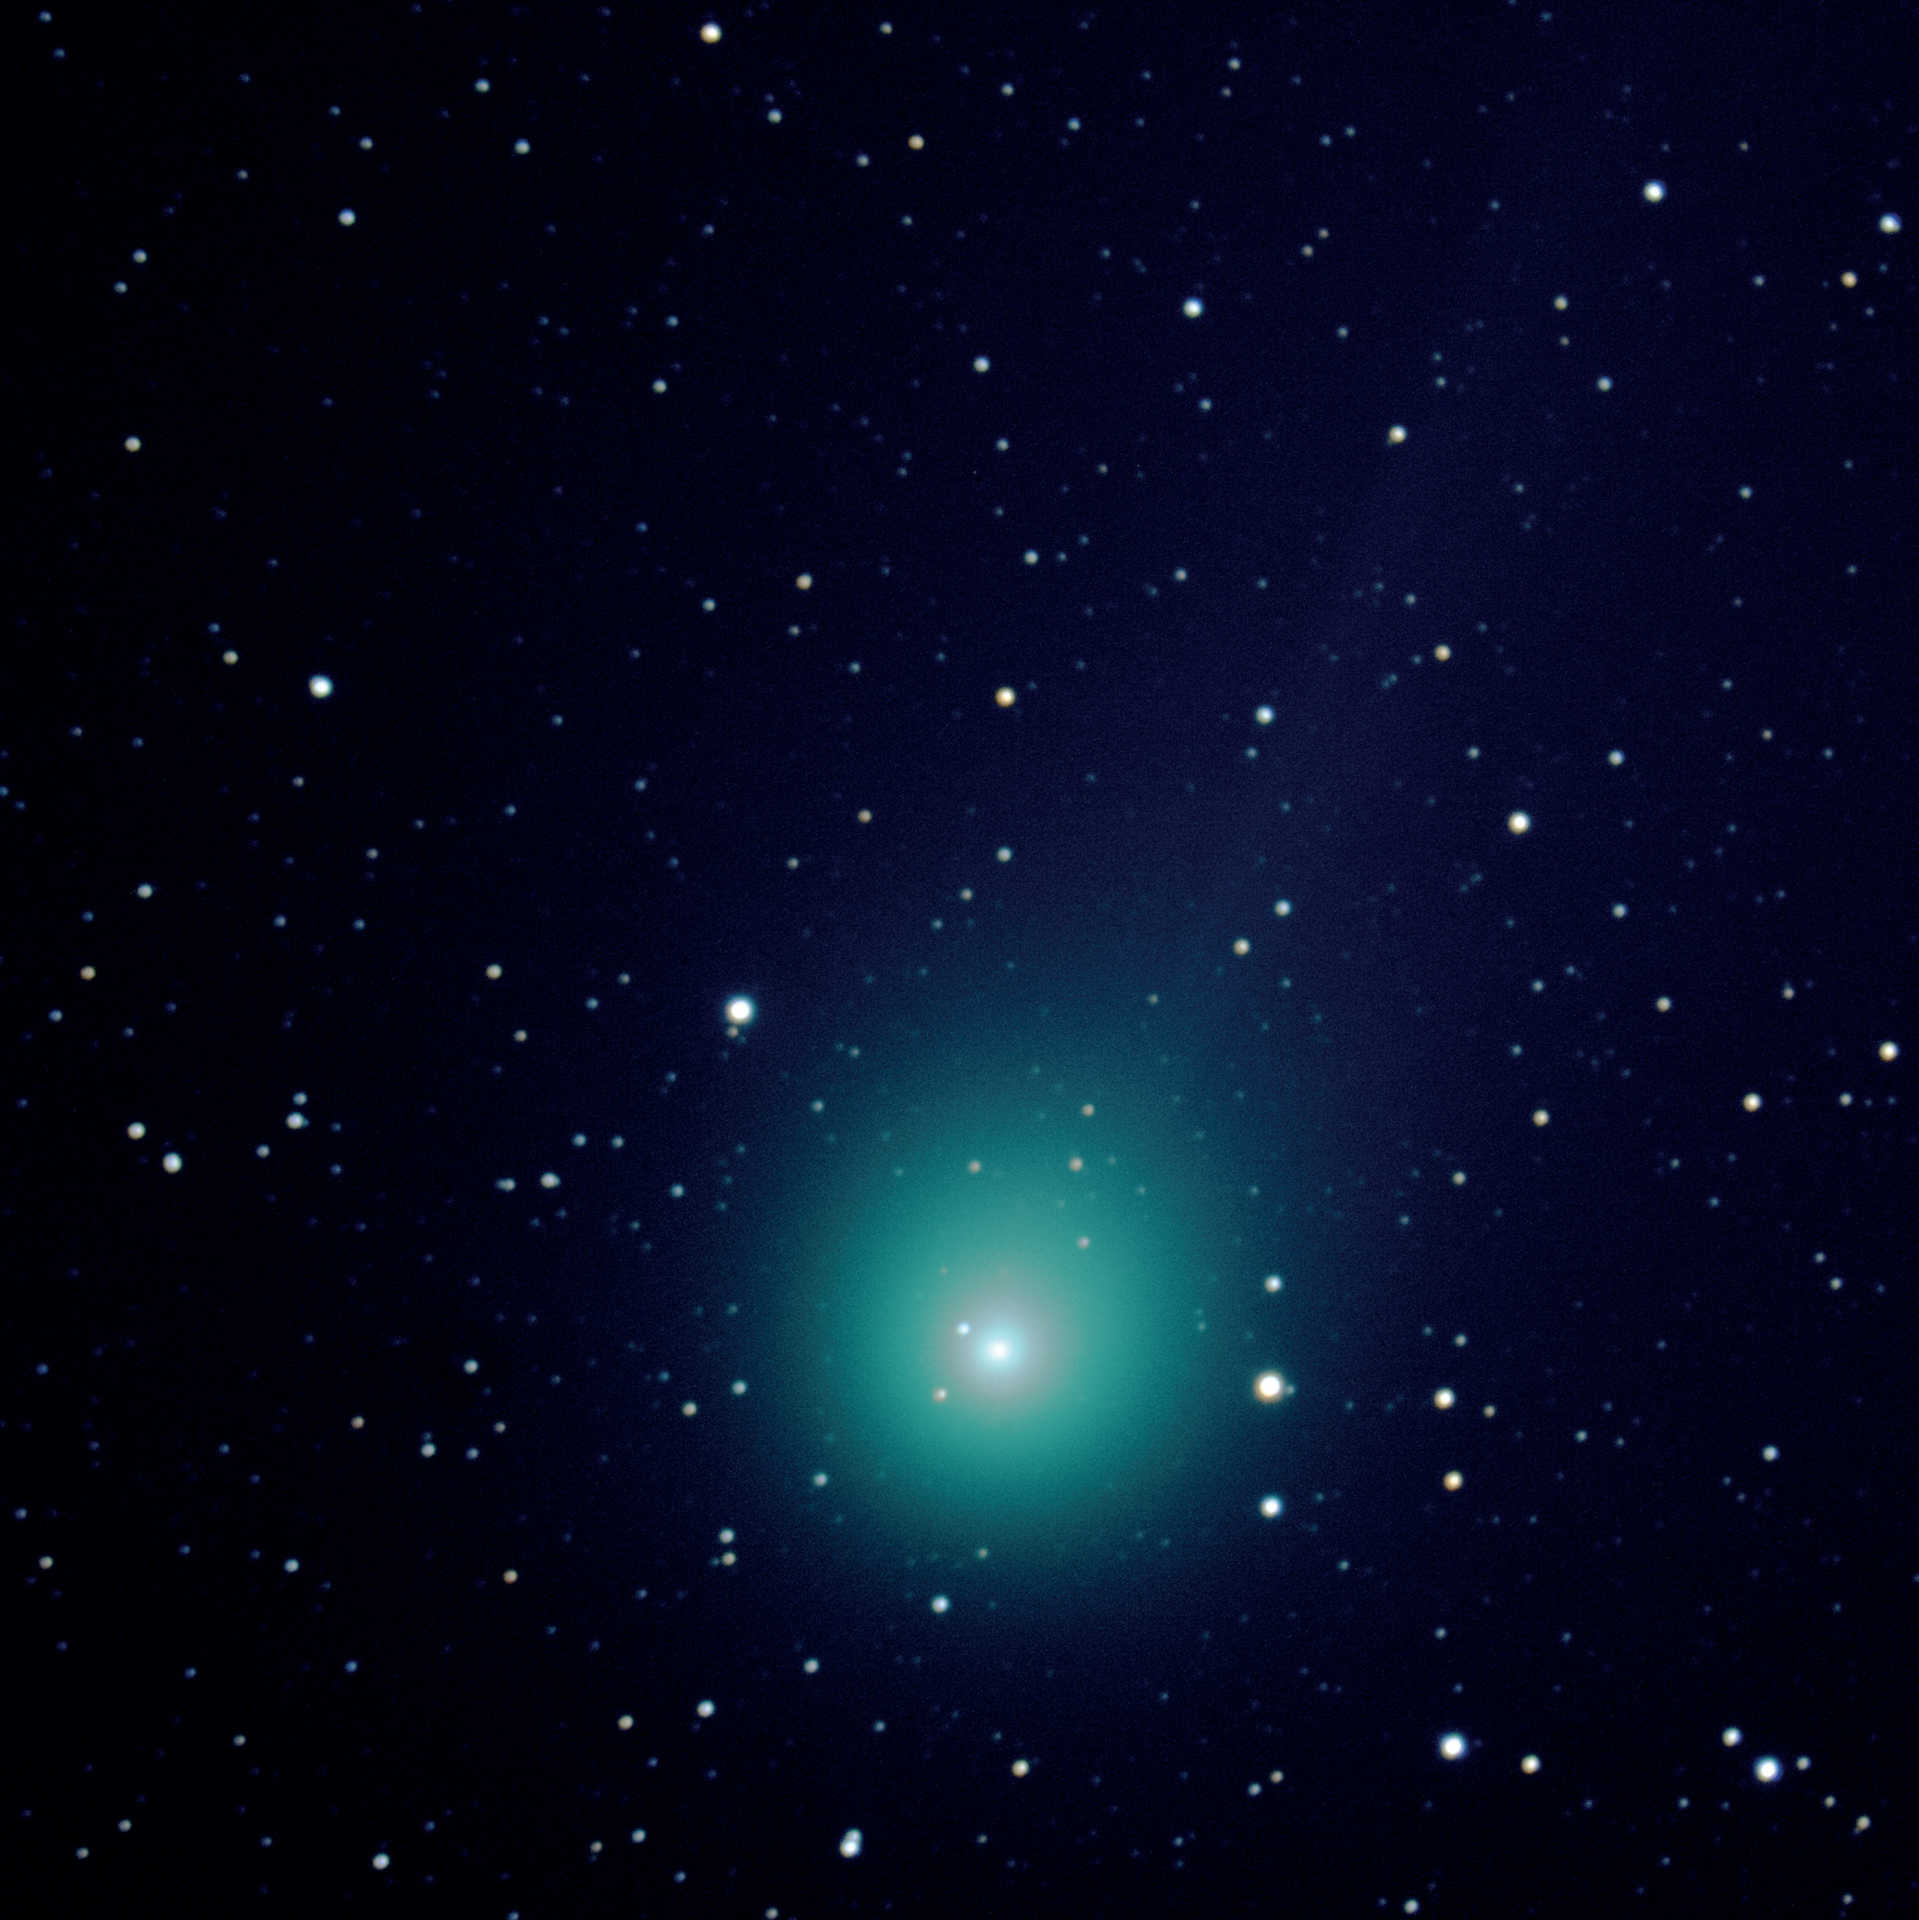 Comet C/2014 Q2 (Lovejoy) with a long focal length Schmidt Cassegrain telescope. Composite image captured on 7.3.2015 just a few minutes after the image above, using a Canon D550 DSLR on a 2000mm telescope with 2,000mm focal length and a 280mm aperture. Five shots each with an exposure time of 120 seconds (total exposure time: 10 minutes) were combined with DeepSkyStacker and Photoshop for the blended image. U. Dittler